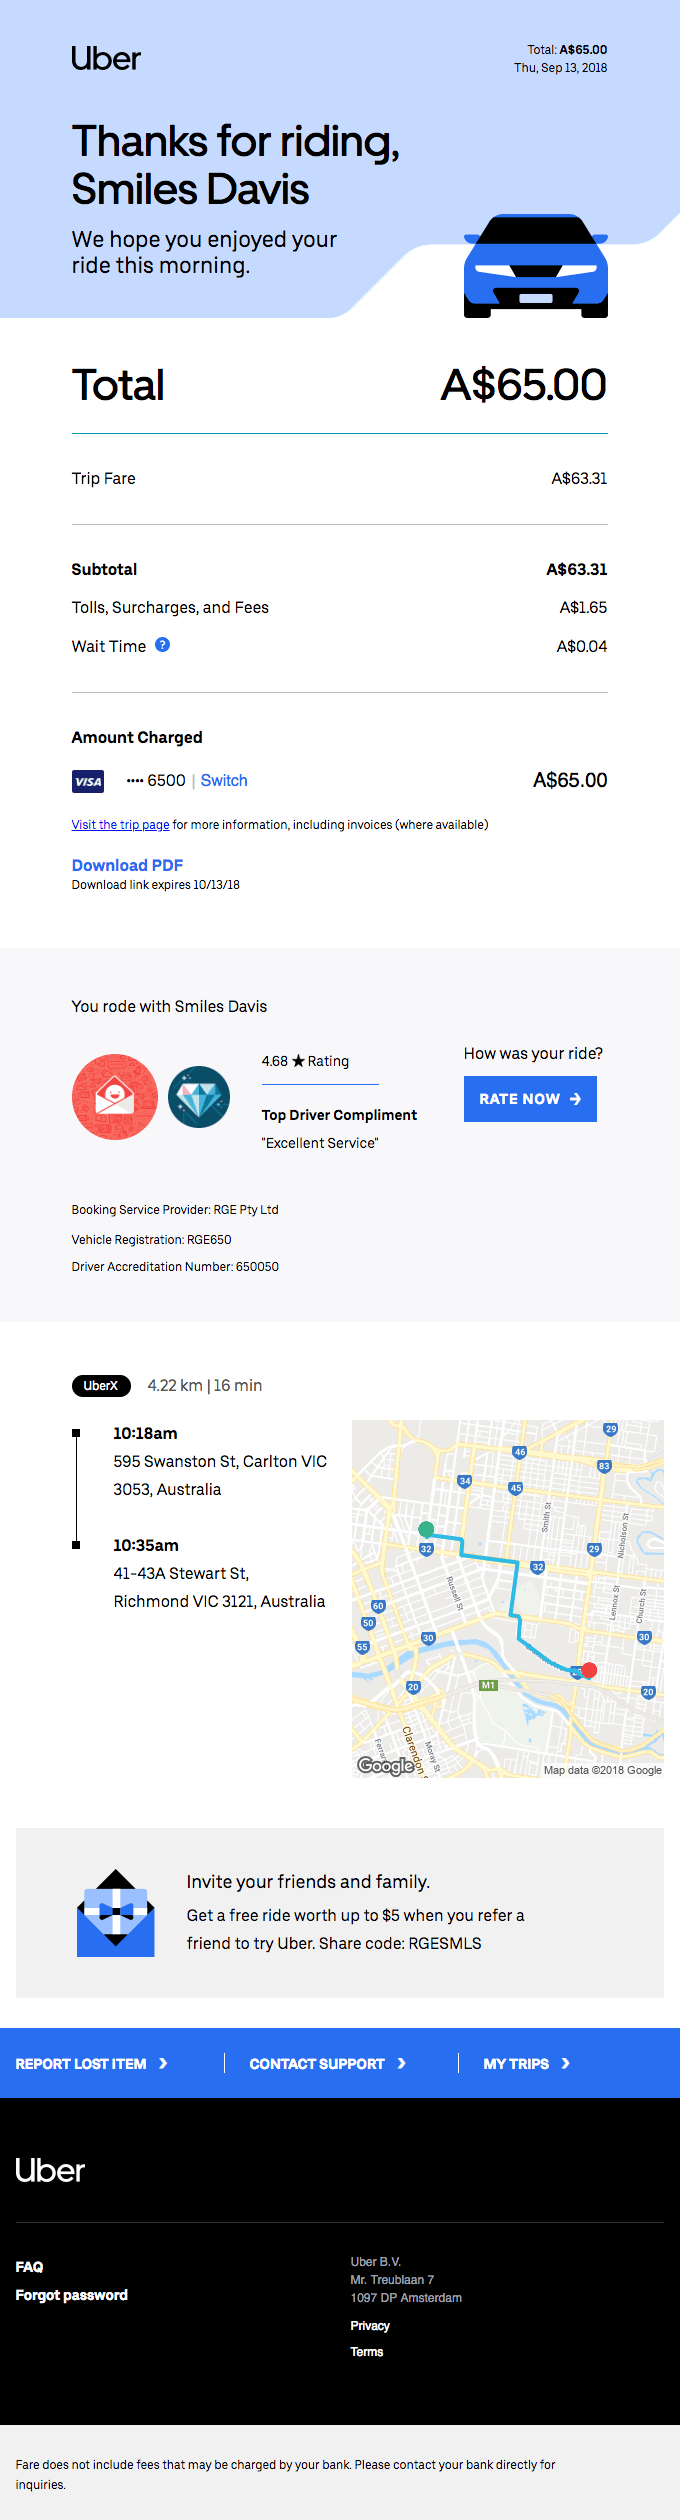 An email from uber 